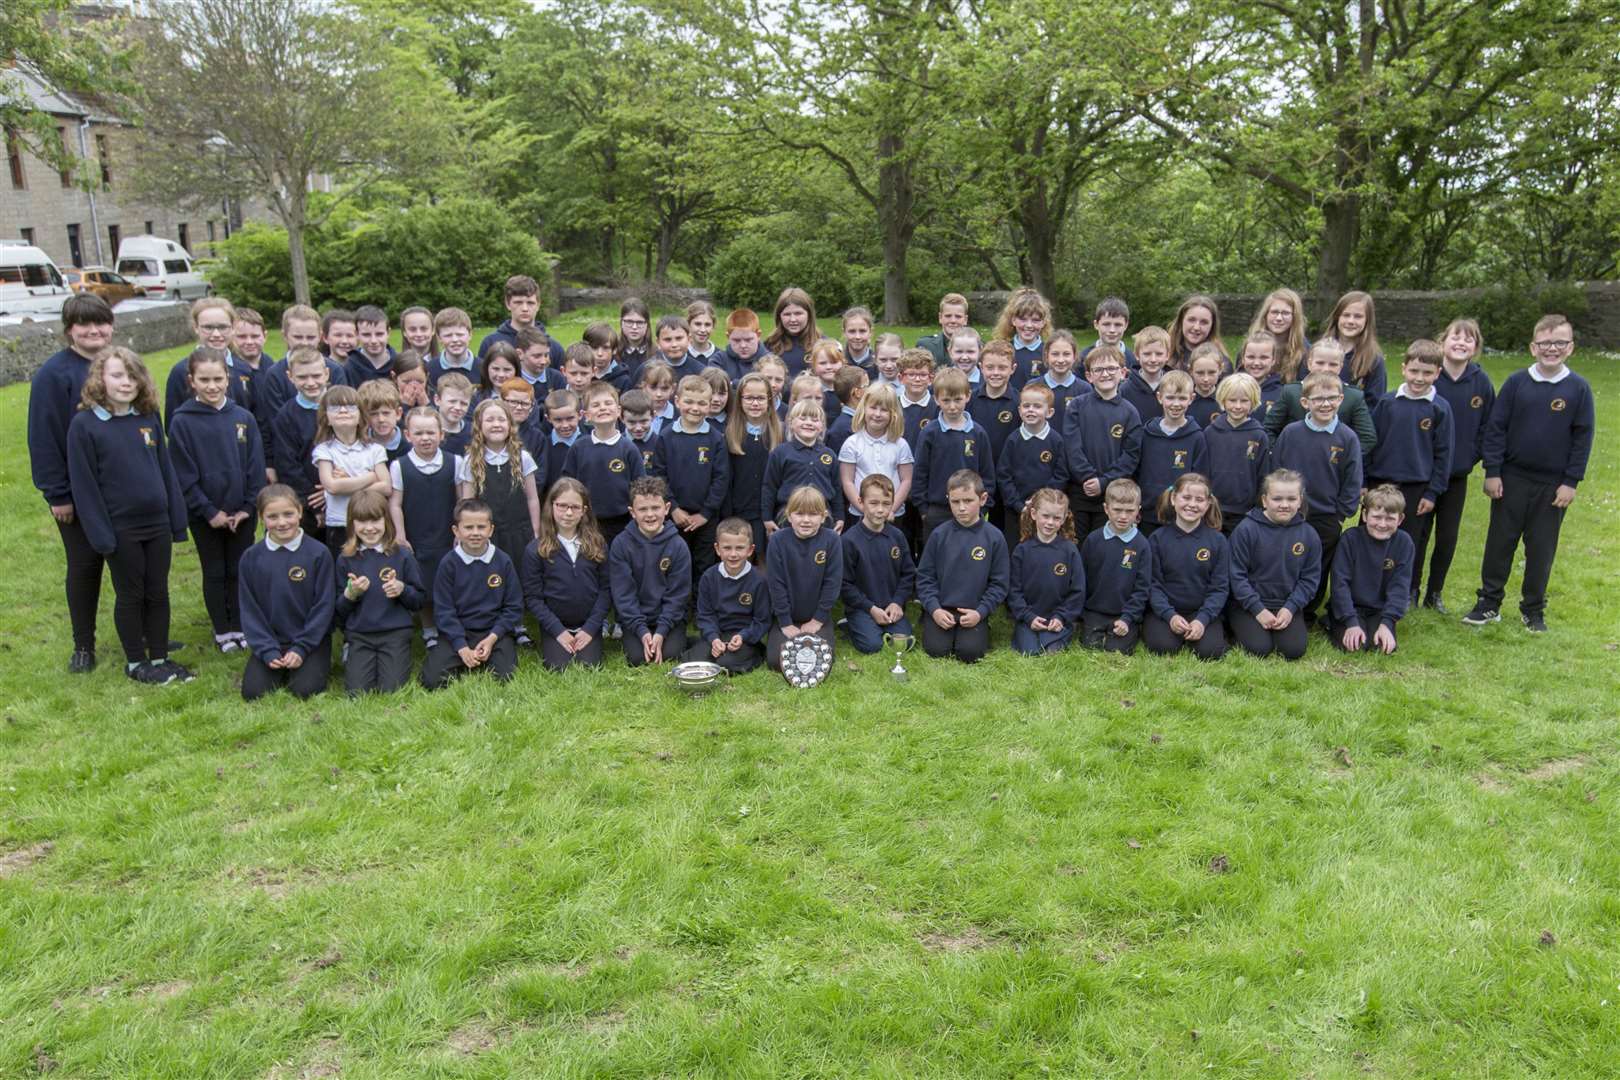 The East Caithness Choir, made up of the entire school rolls of Thrumster and Watten primary schools, won the Miss Miller Cup for choirs, 18 years and under. Picture: Robert MacDonald / Northern Studios